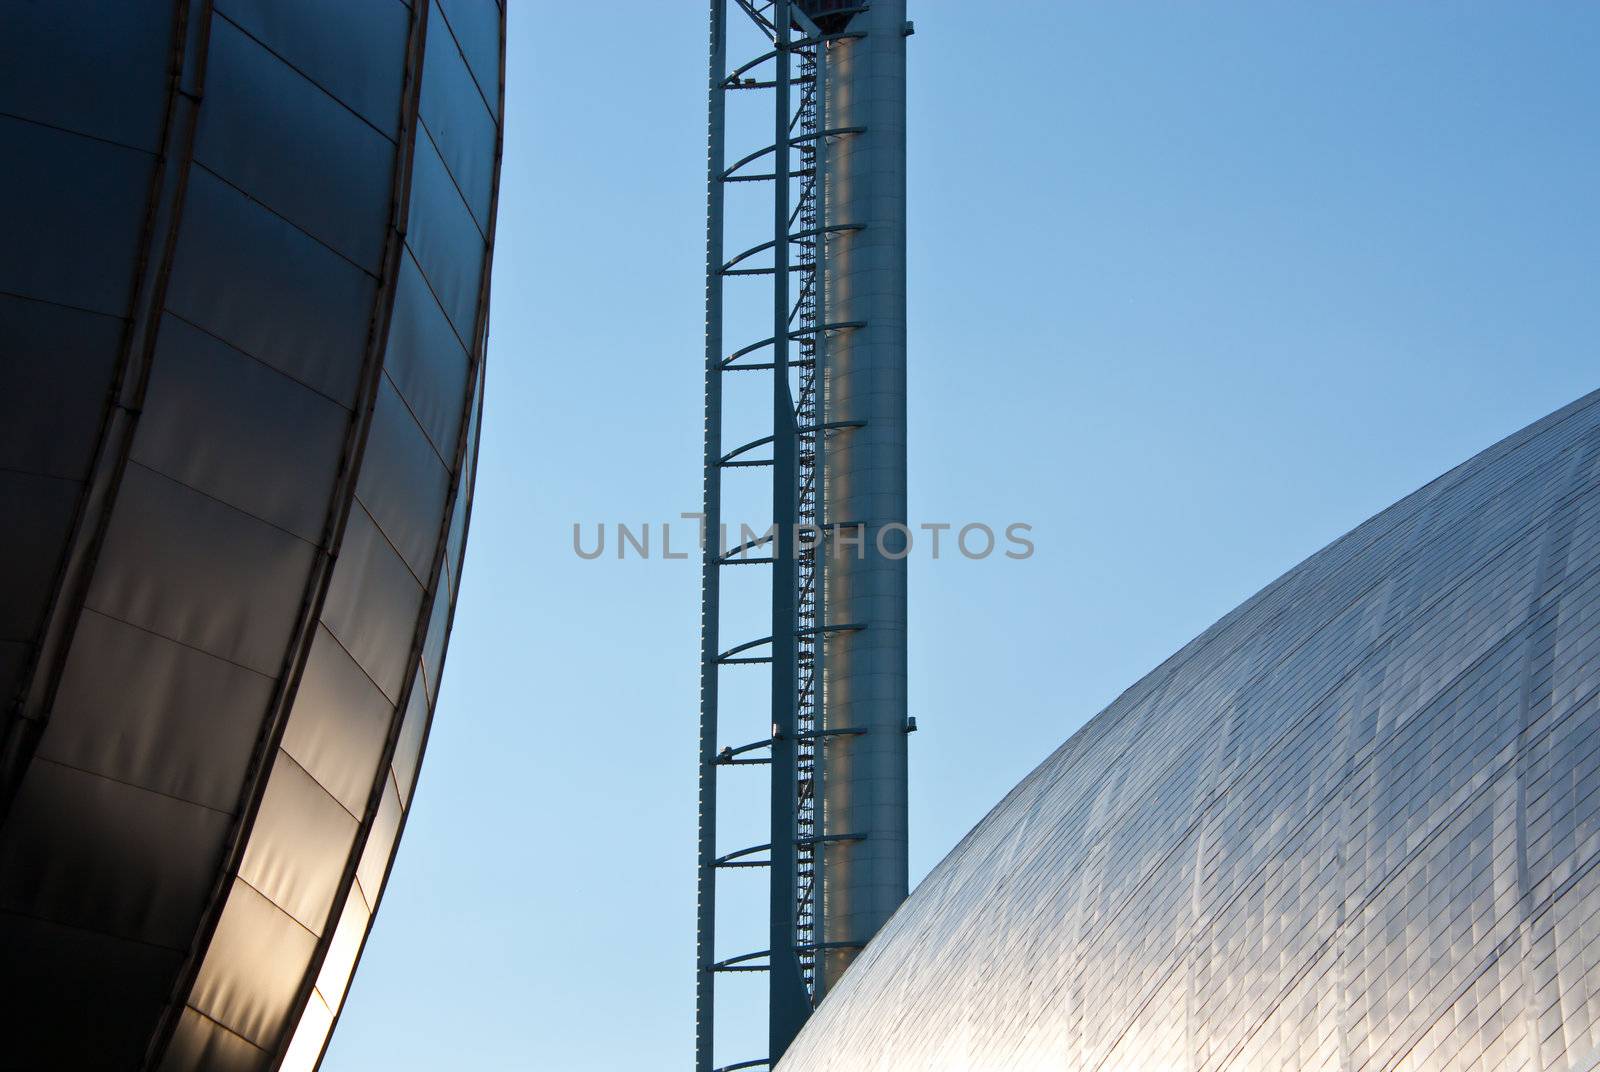 Glasgow Science Center by Perseomedusa